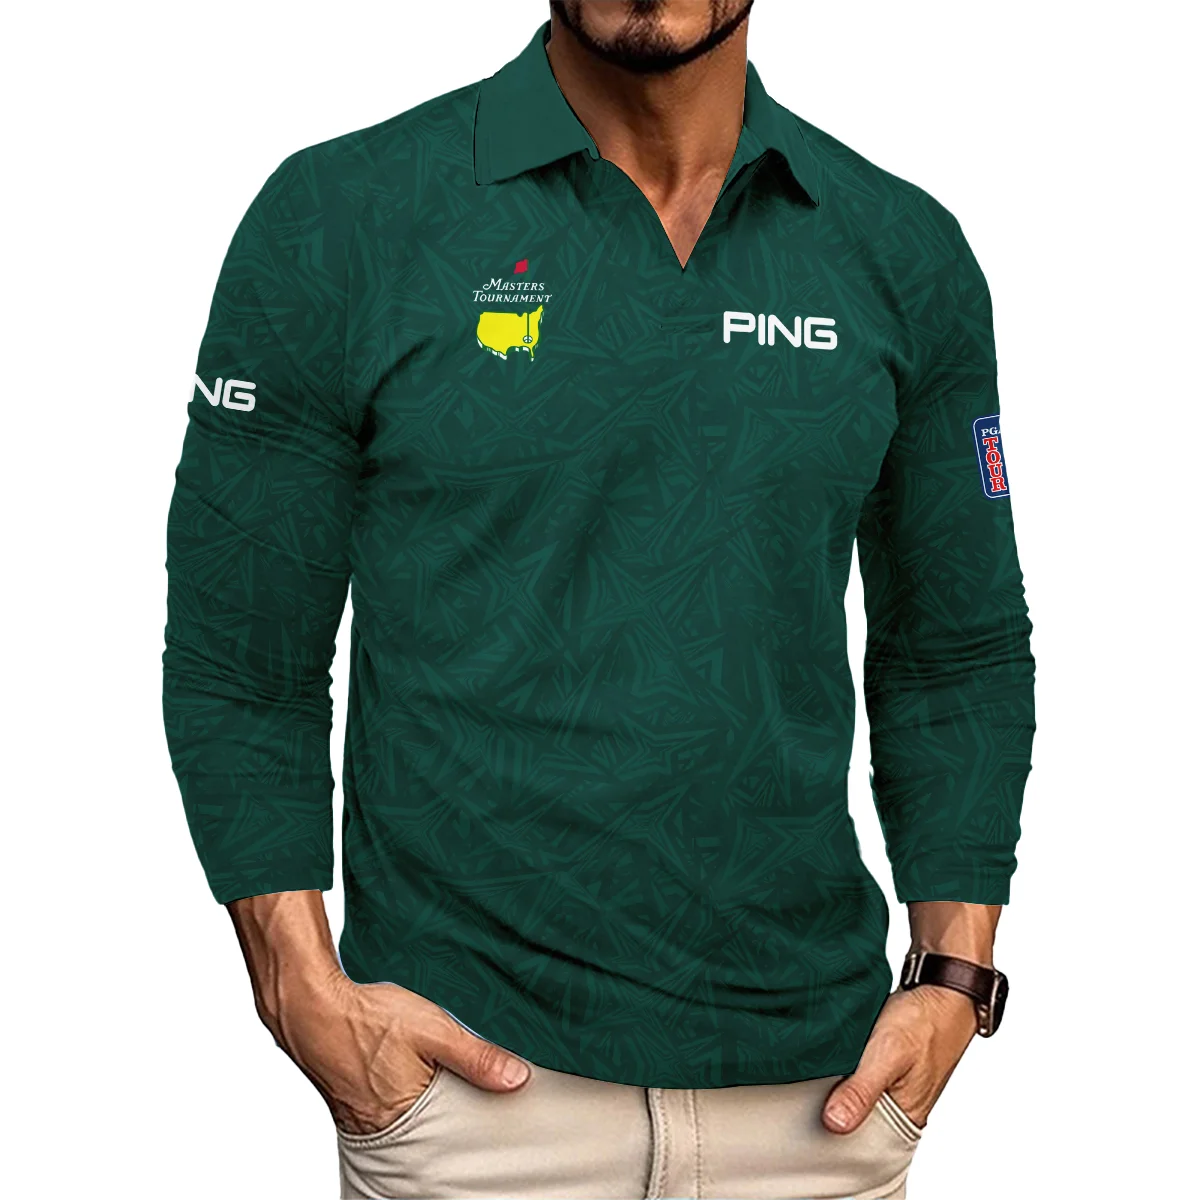 Stars Dark Green Abstract Sport Masters Tournament Ping Vneck Long Polo Shirt Style Classic Long Polo Shirt For Men